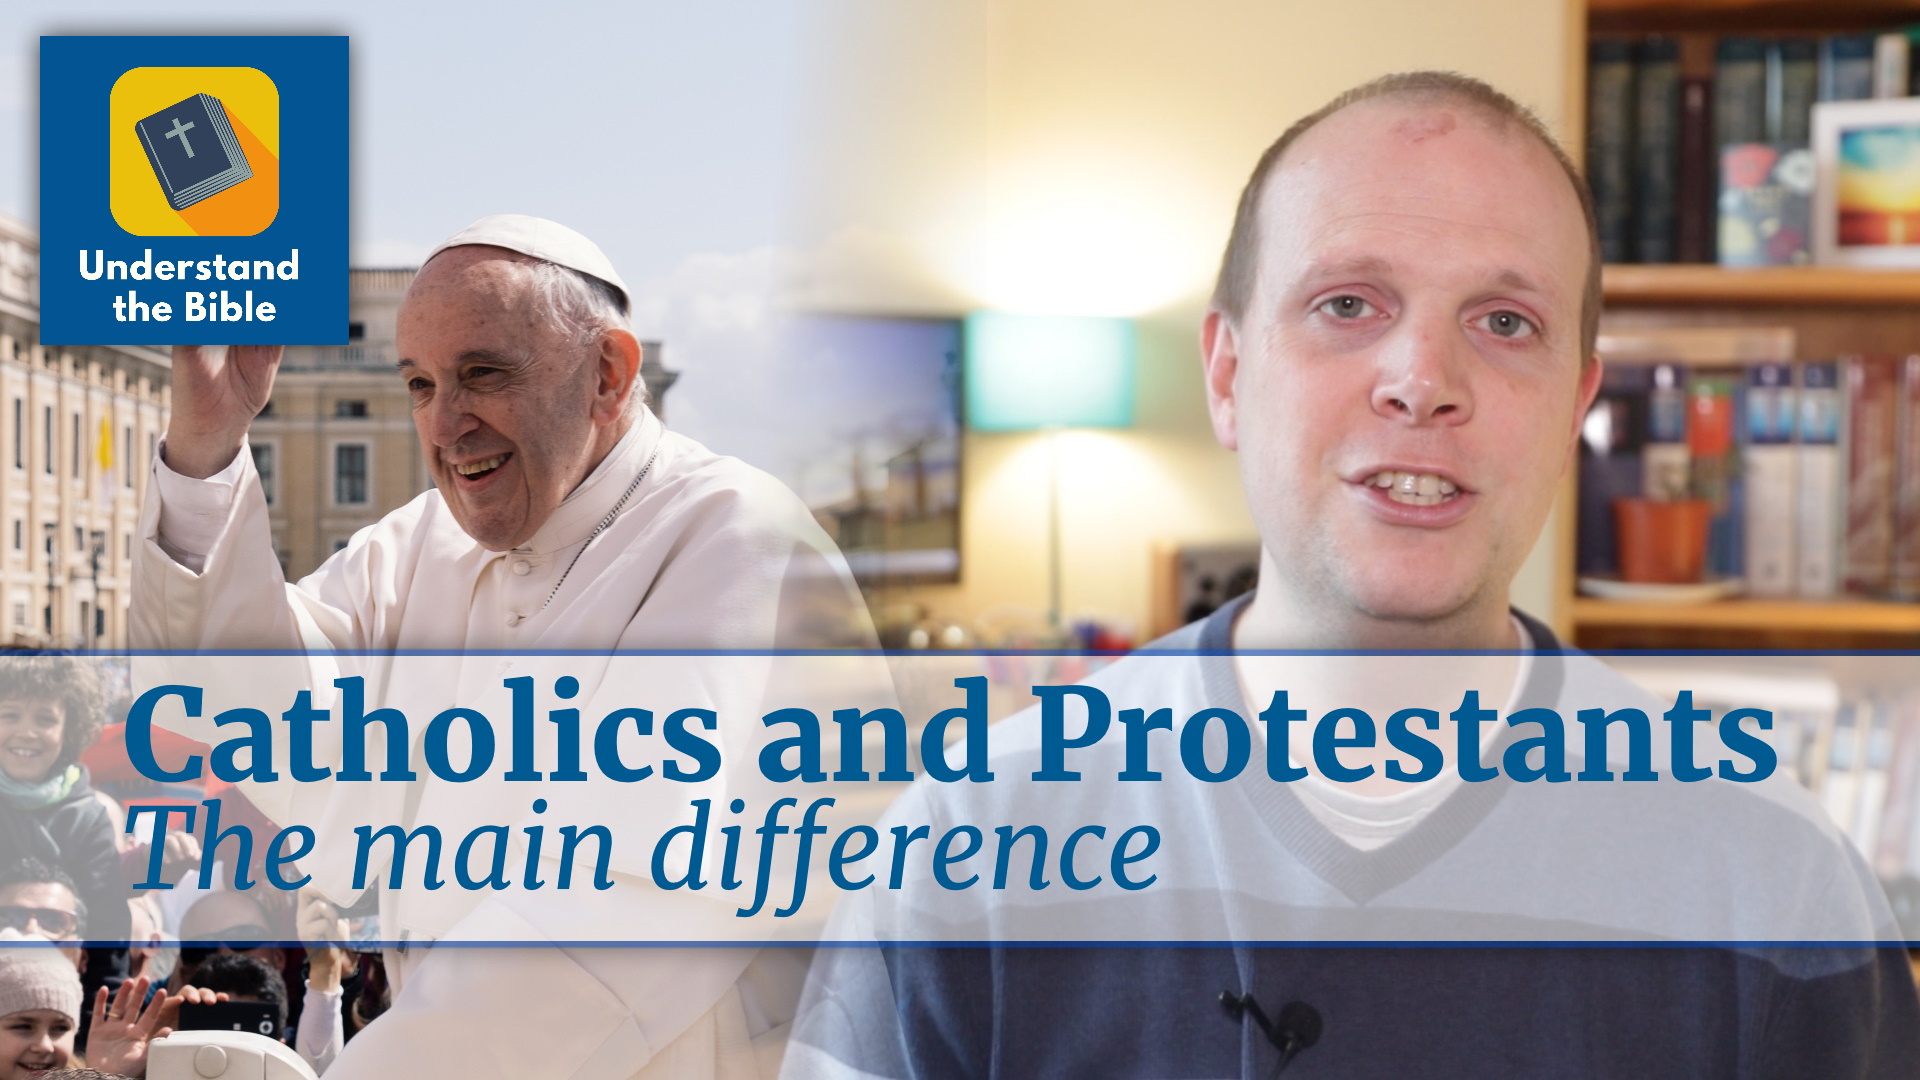 Main difference between Protestants and Catholics